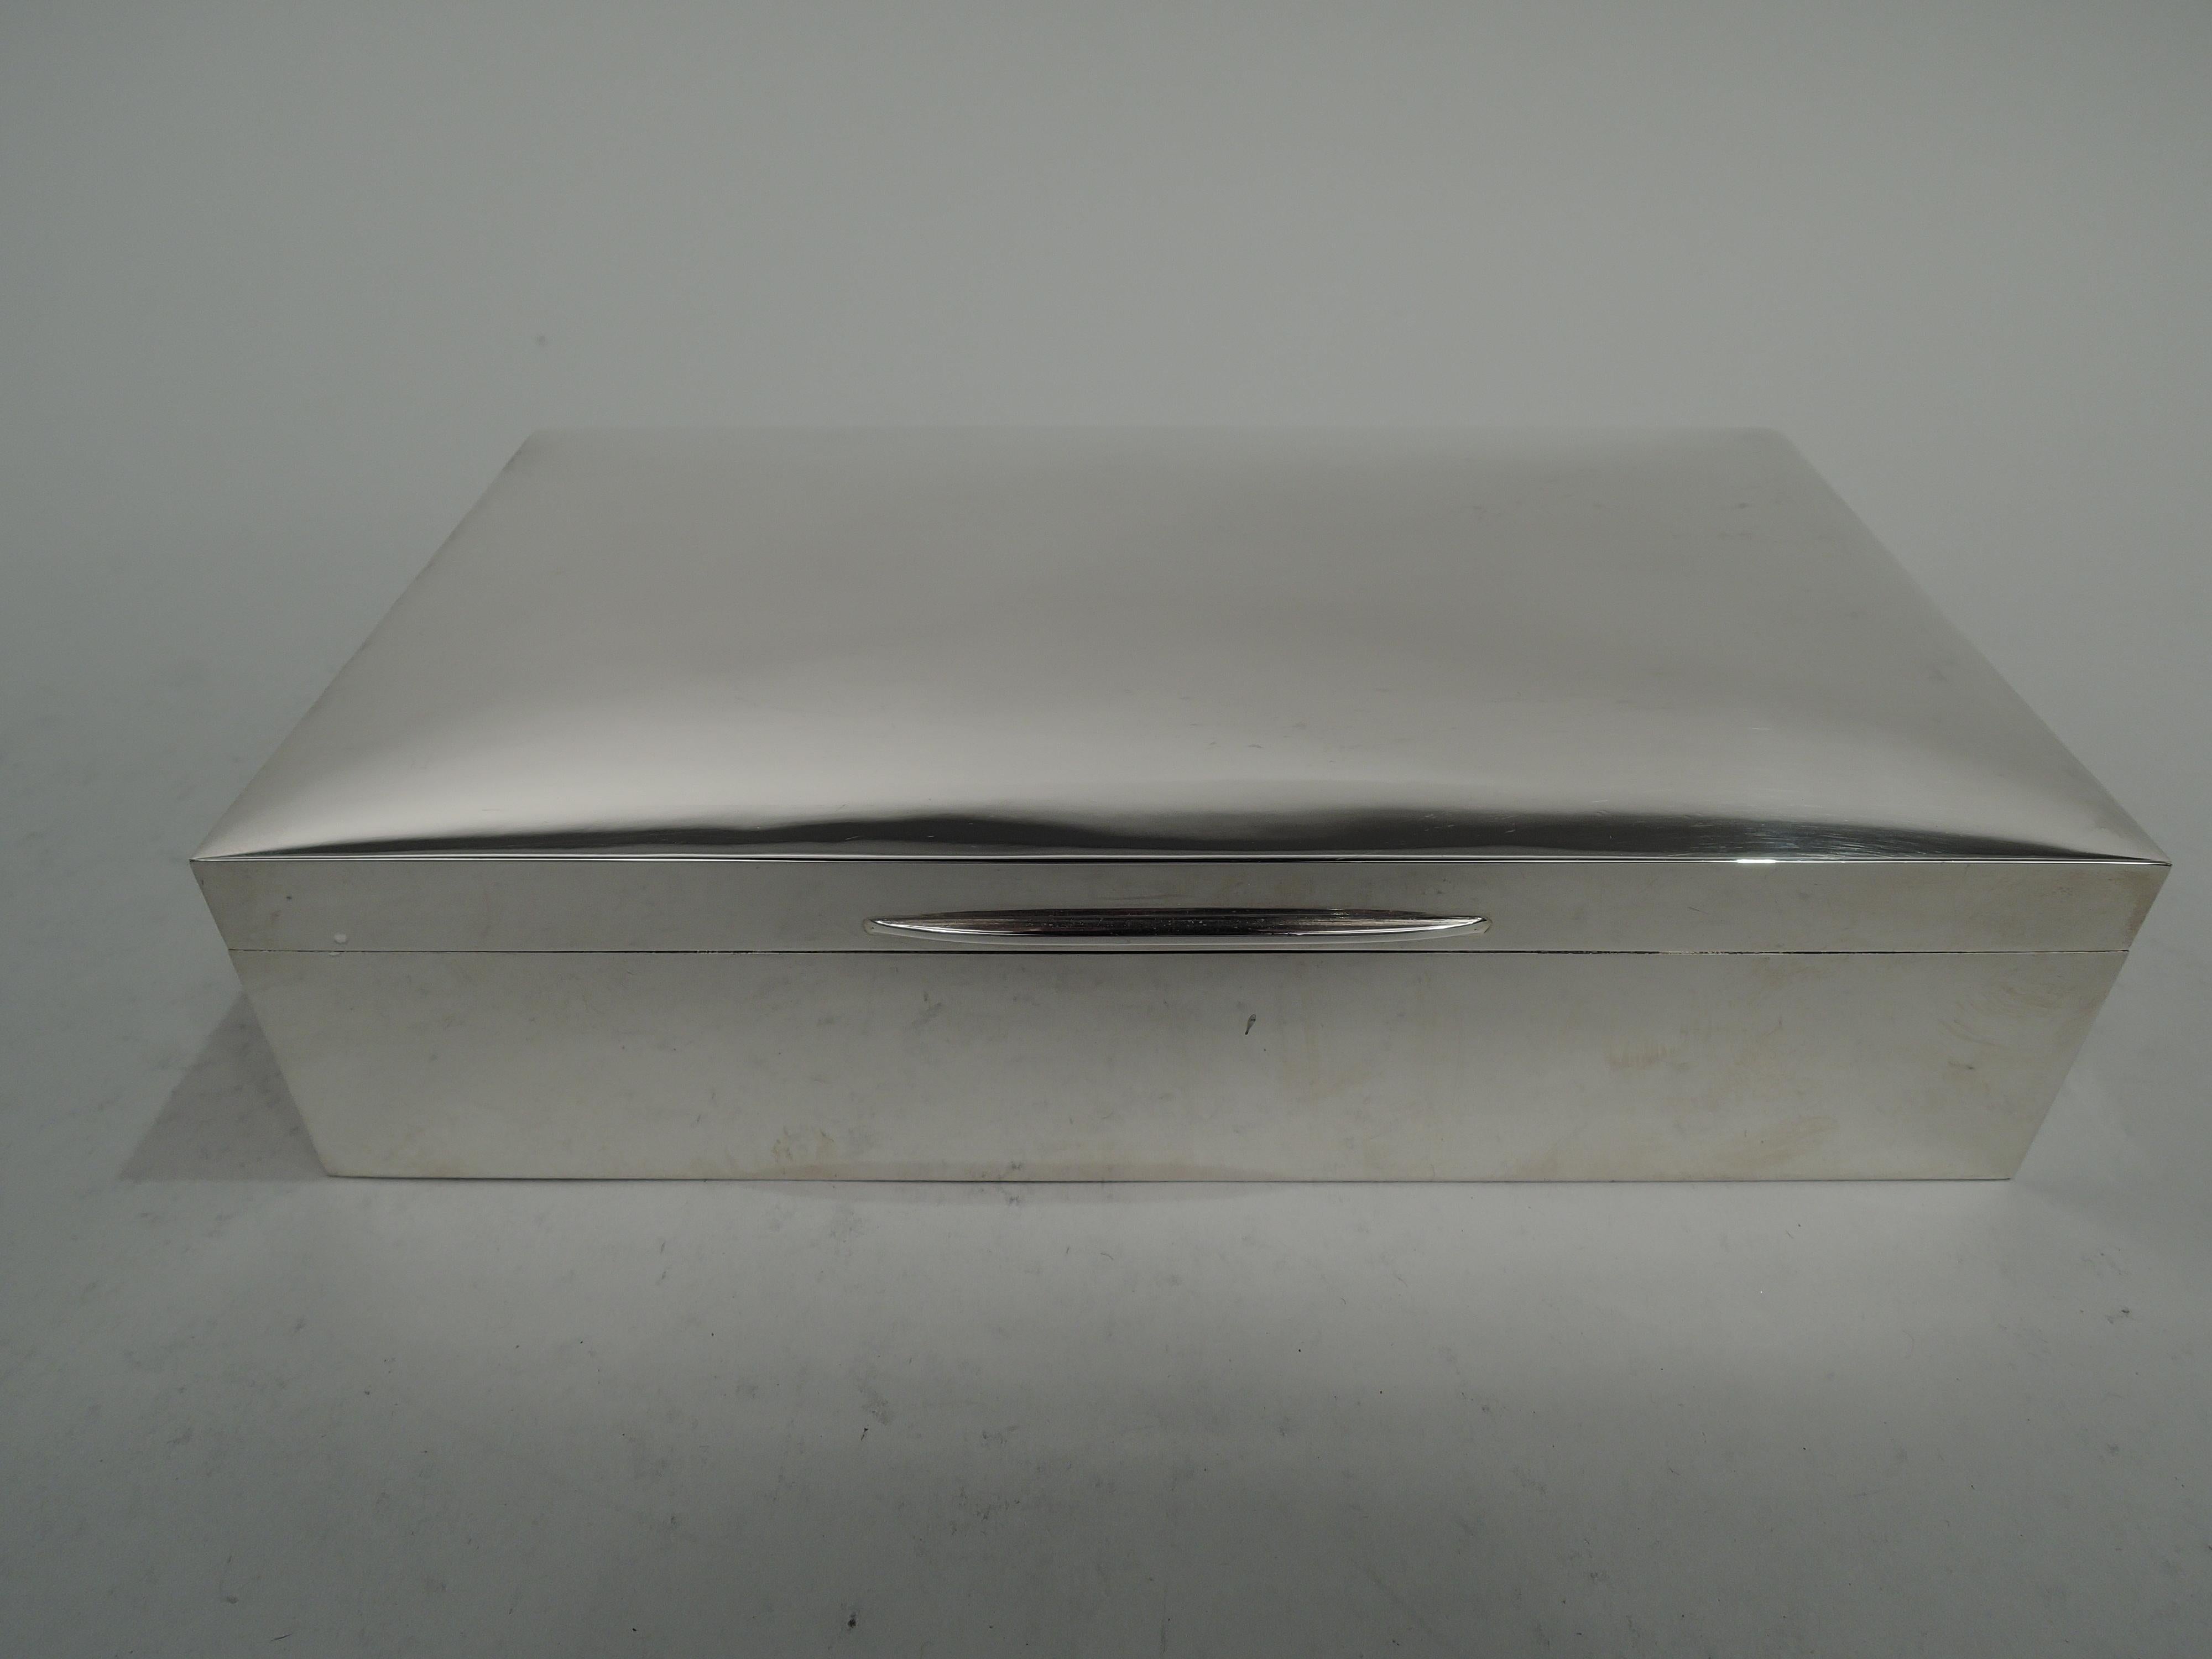 Elizabeth II sterling silver box. Made by Padgett & Braham Ltd in London in 1963. Rectangular with straight sides. Cover hinged with gently curved top and tapering tab. Interior cedar-lined and partitioned. Open leather-lined bottom. Heavy gross